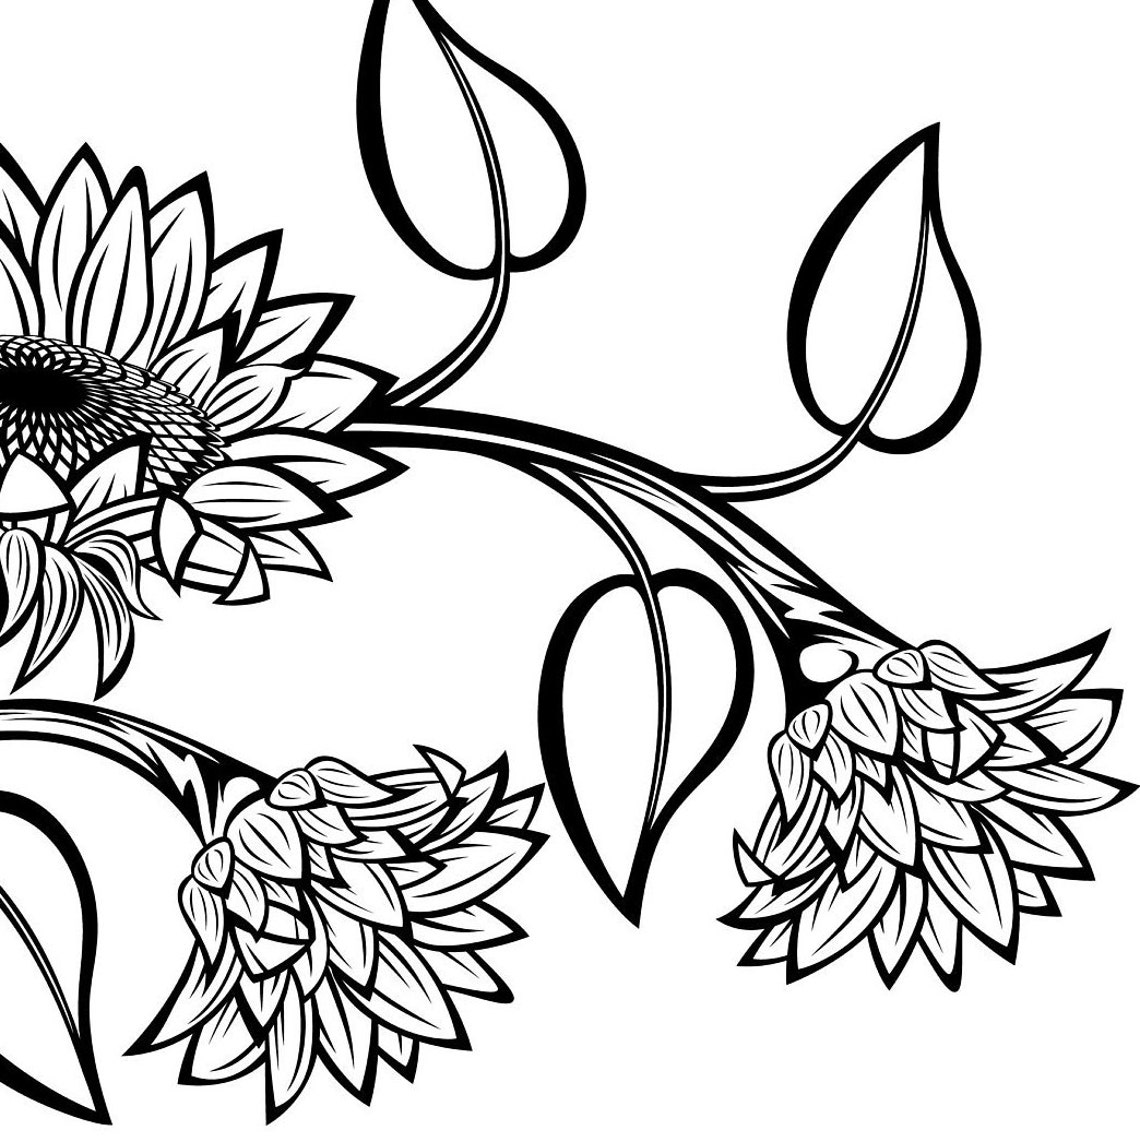 Black and white sunflowers for design SVG Sunflower cut file | Etsy